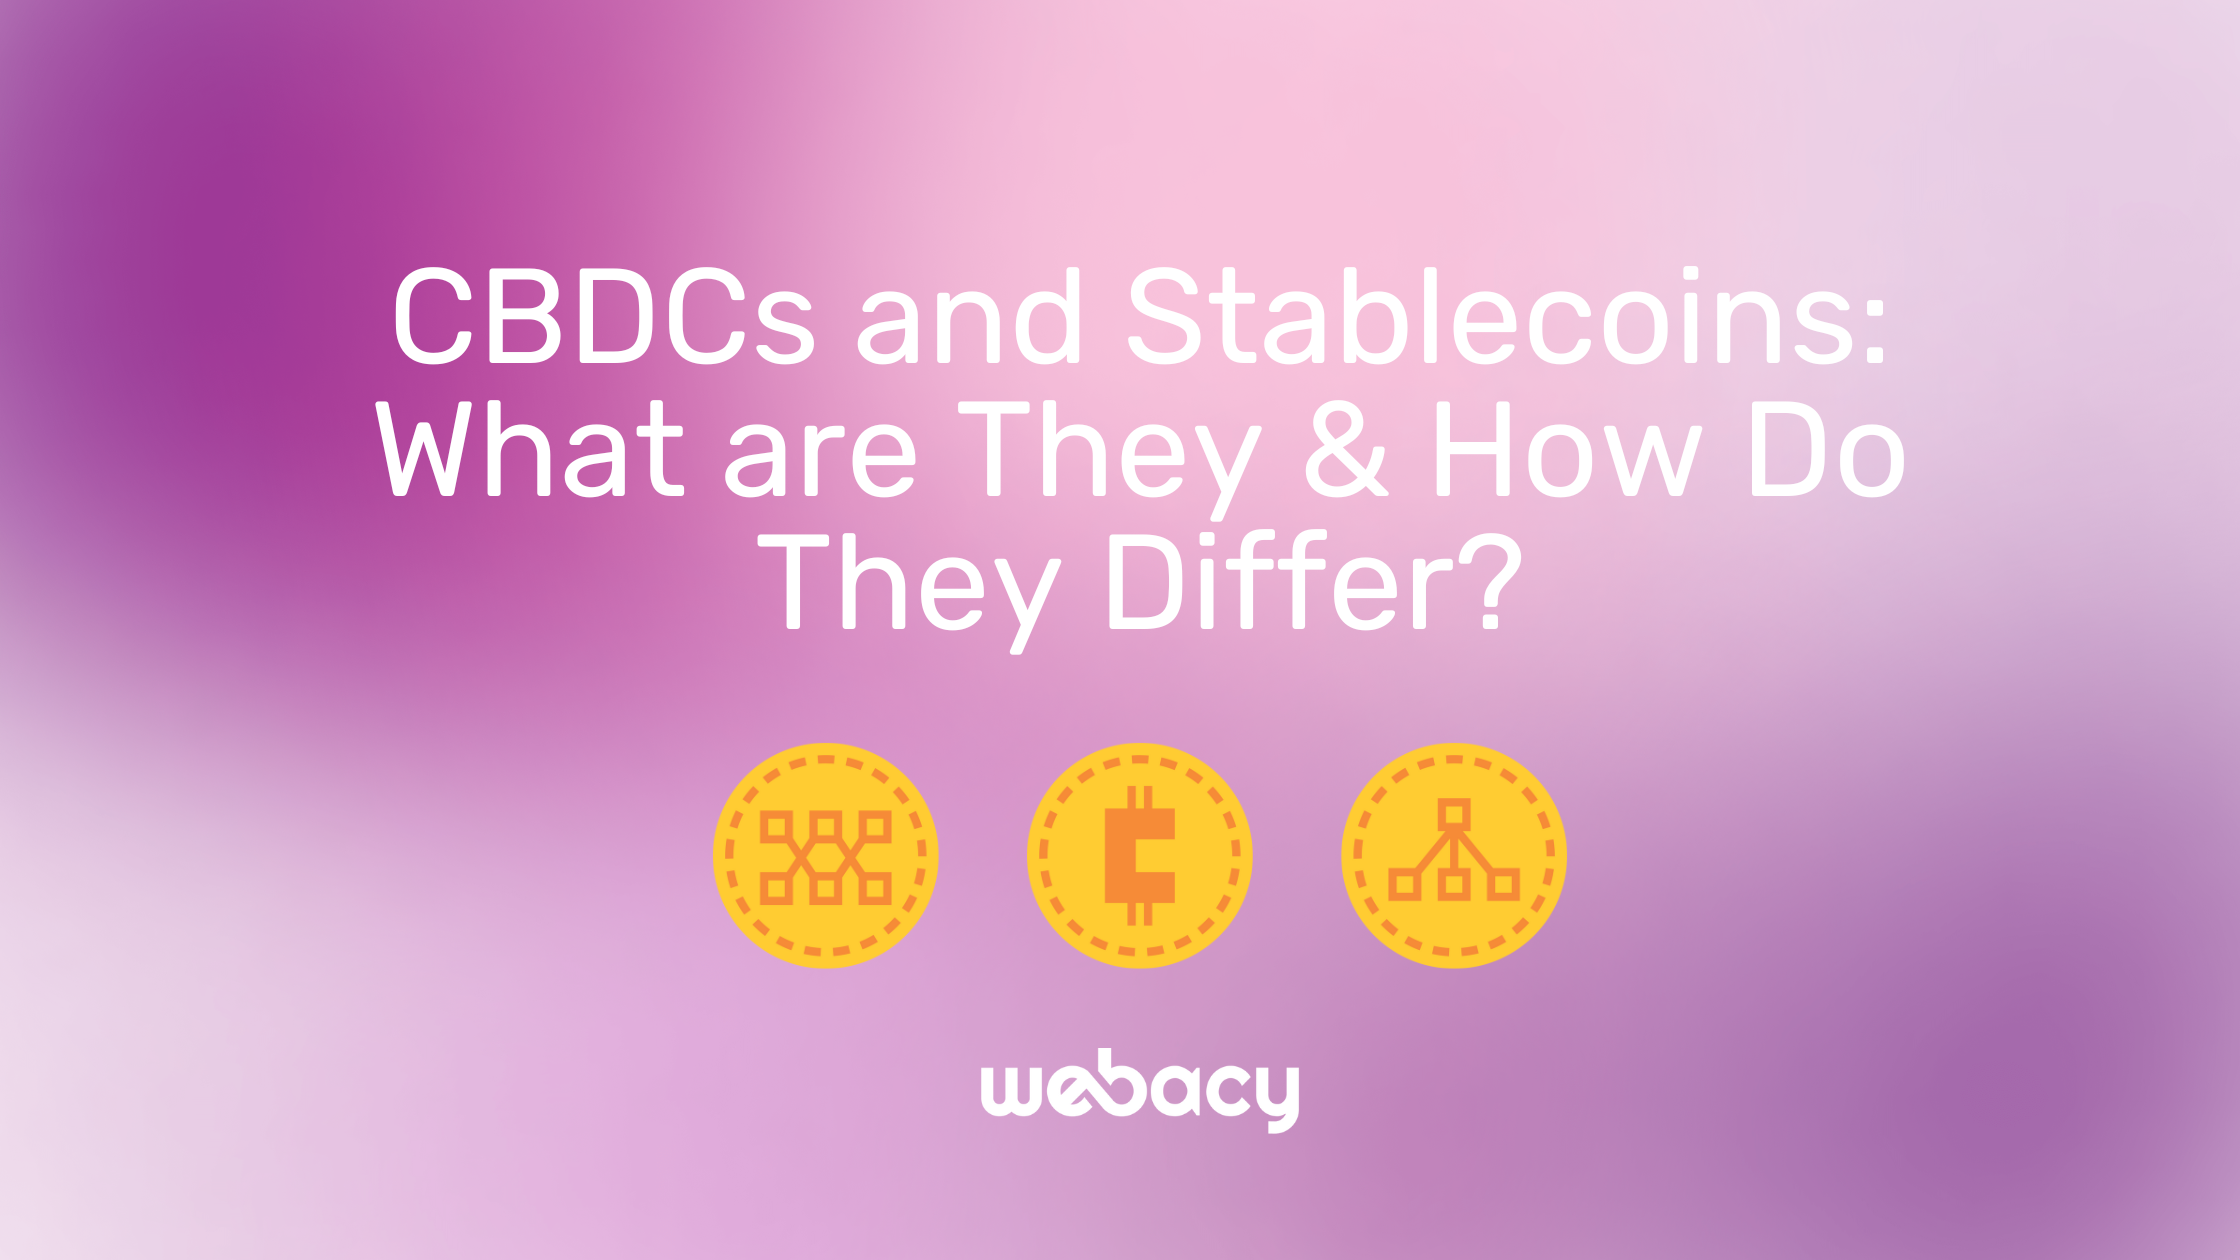 CBDCs and Stablecoins: What are They & How Do They Differ?